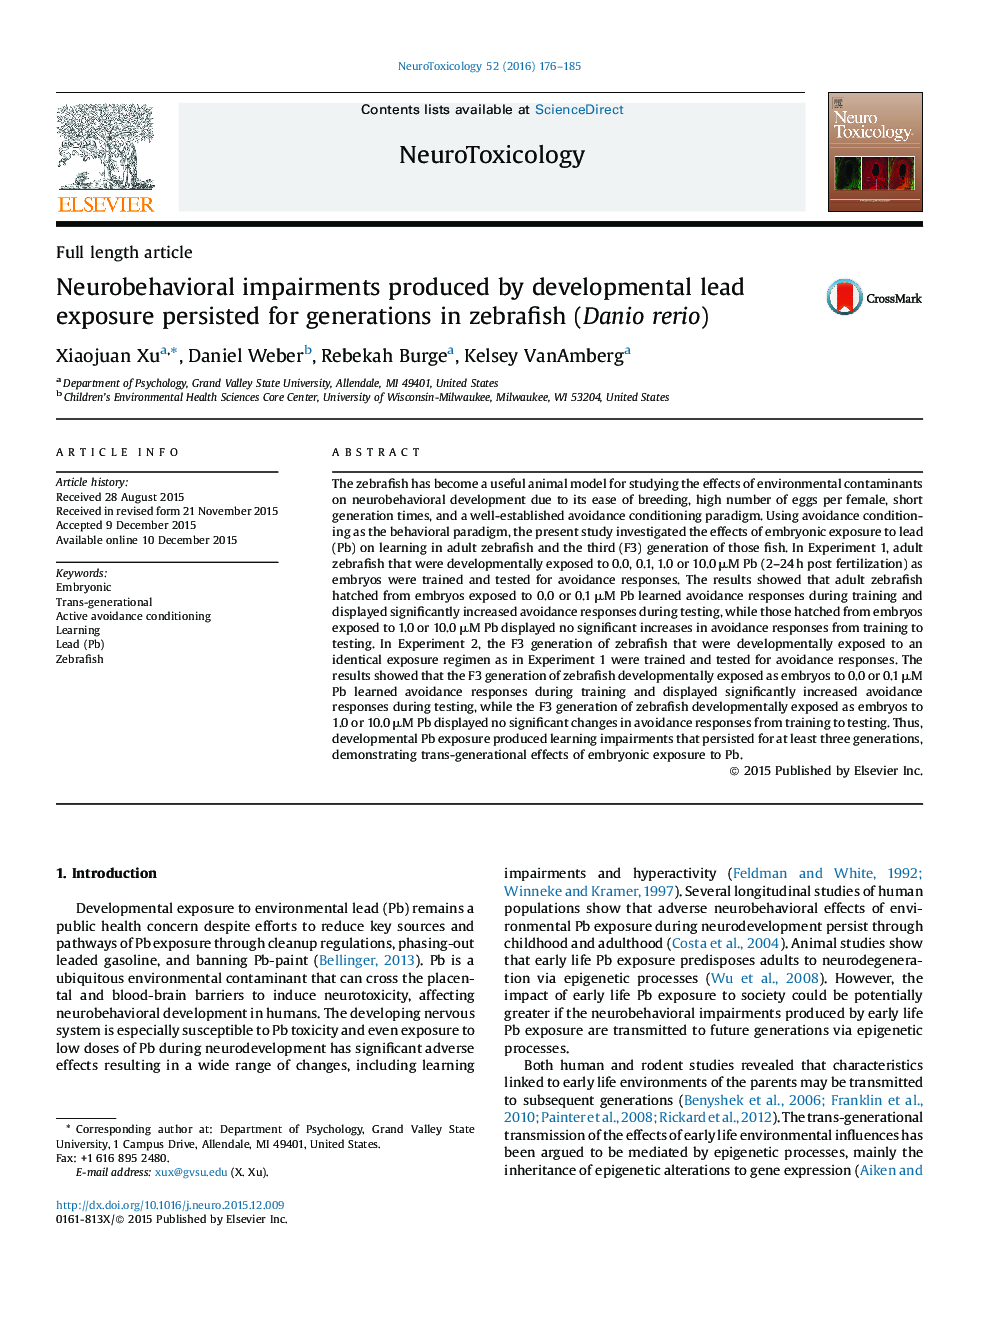 Full length articleNeurobehavioral impairments produced by developmental lead exposure persisted for generations in zebrafish (Danio rerio)